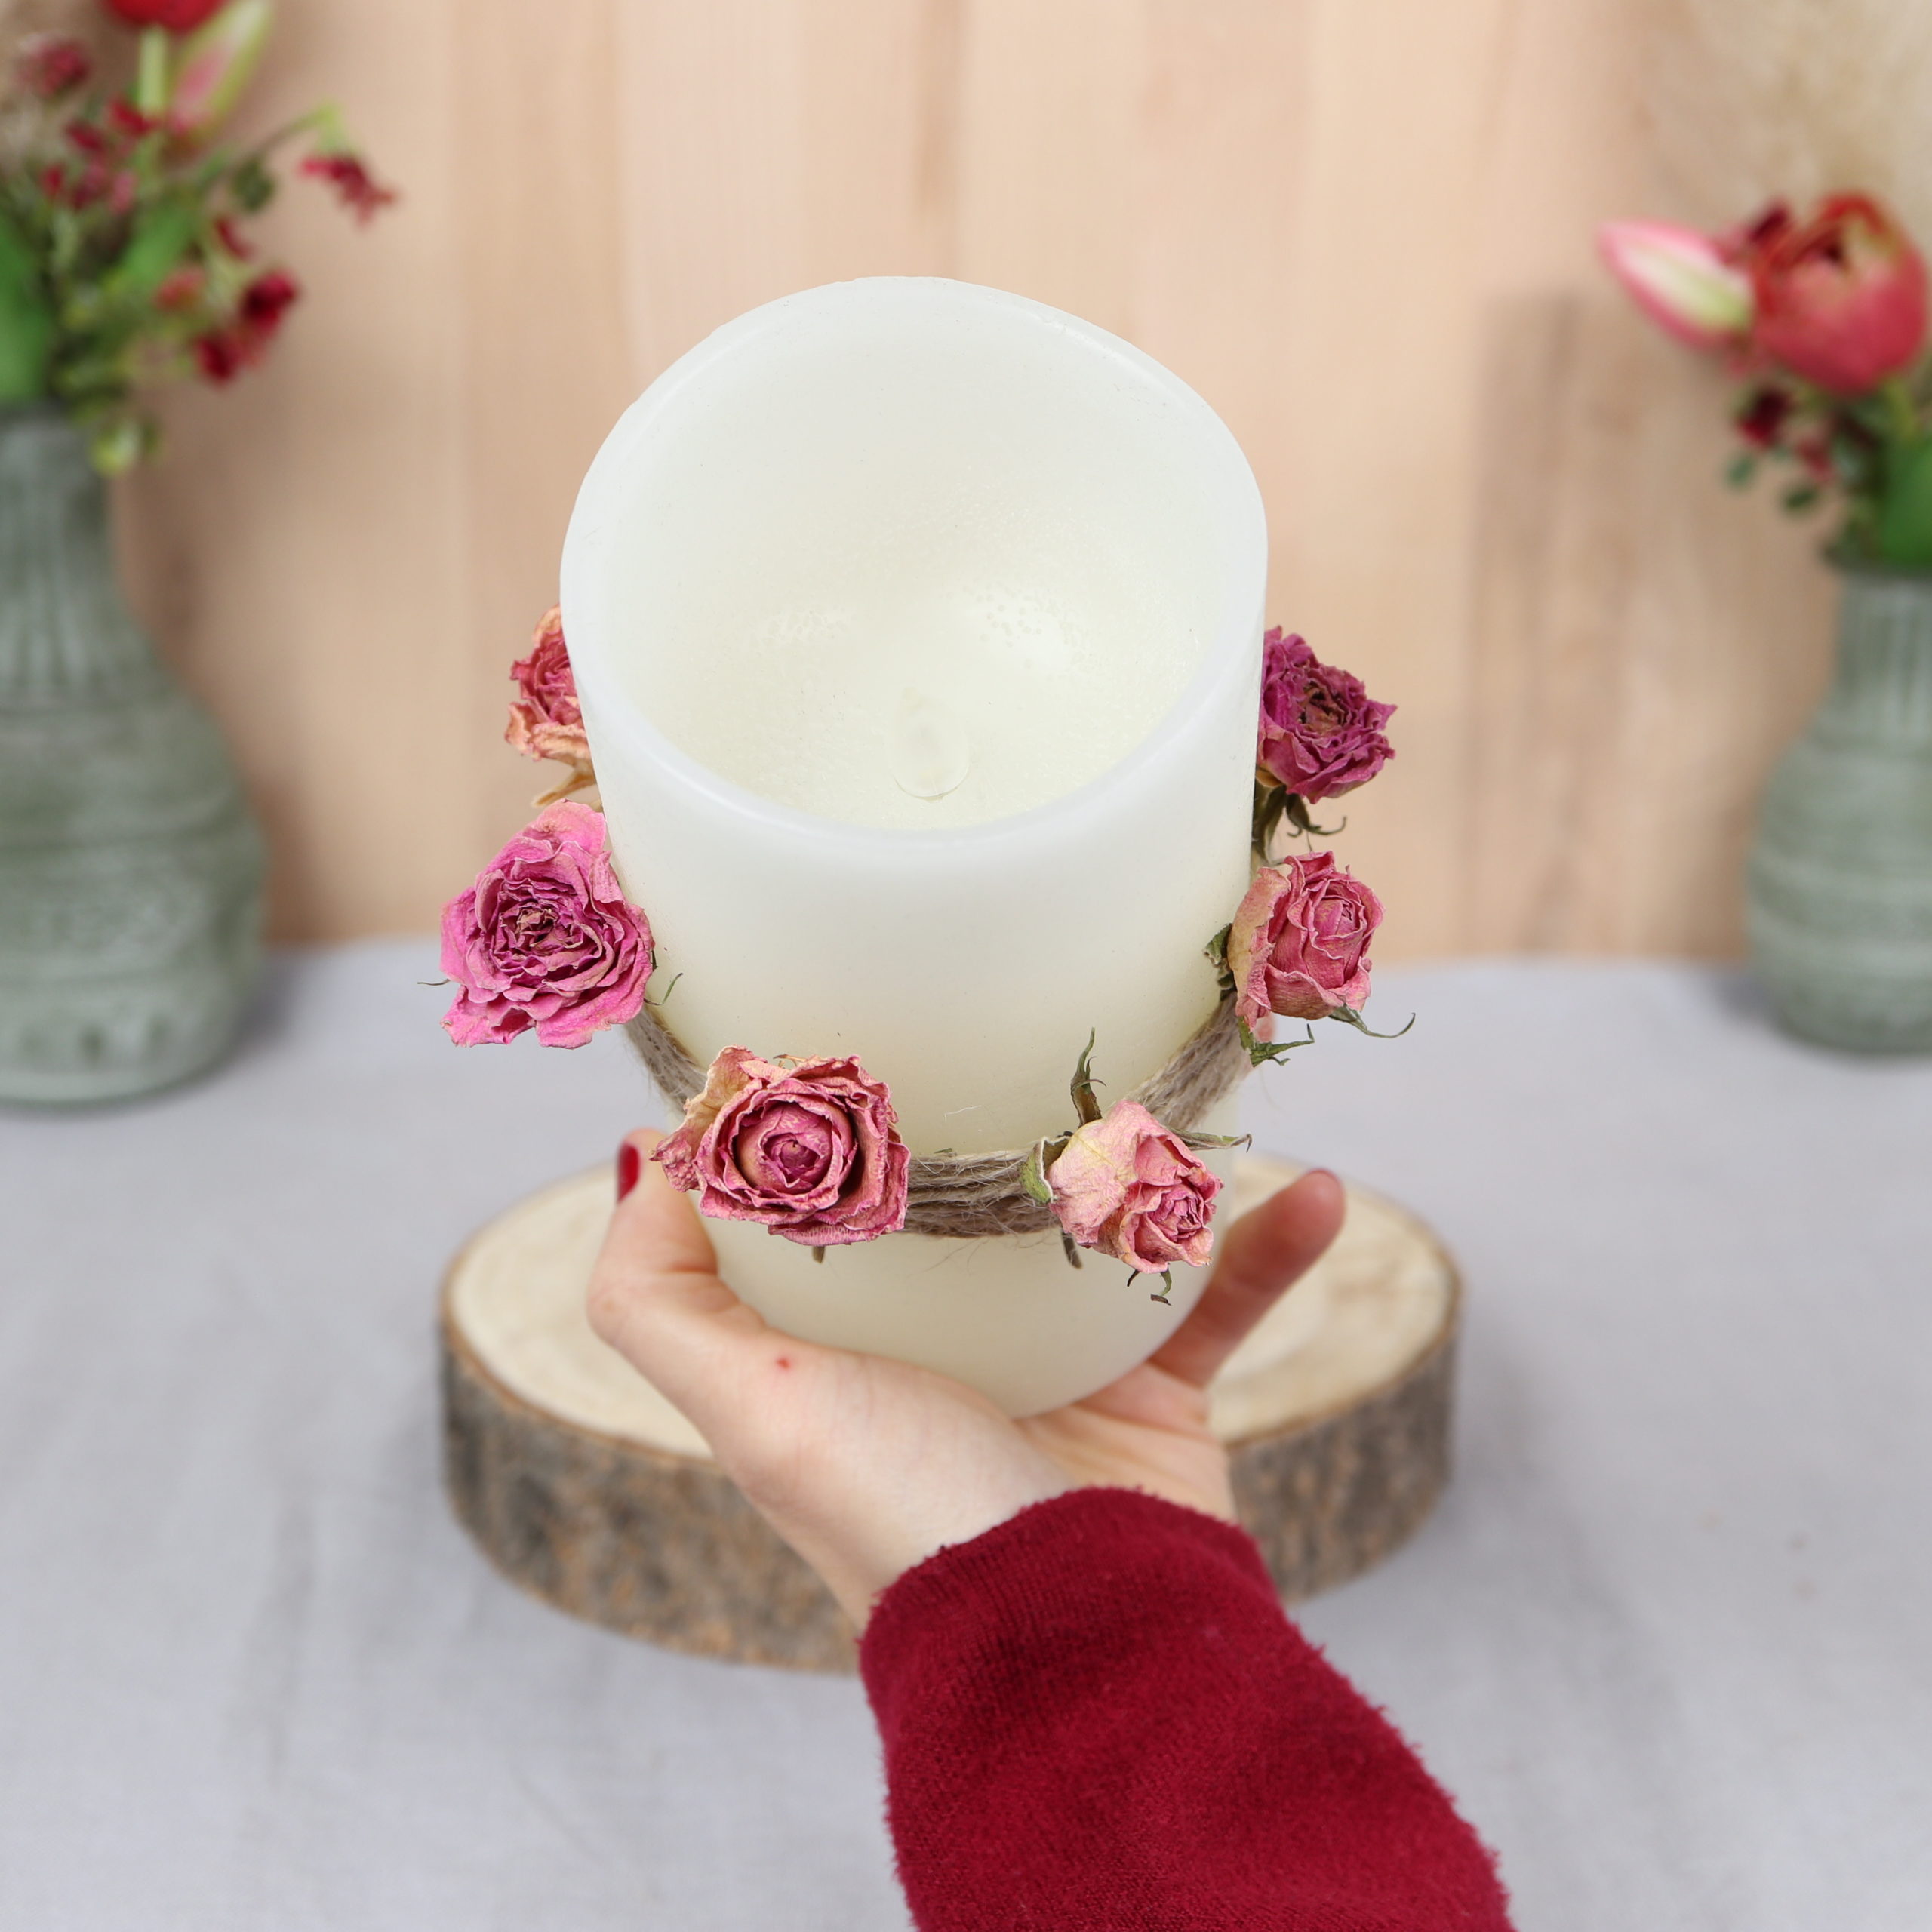 DIY  Romantic LED Candle Decoration with Dried Roses